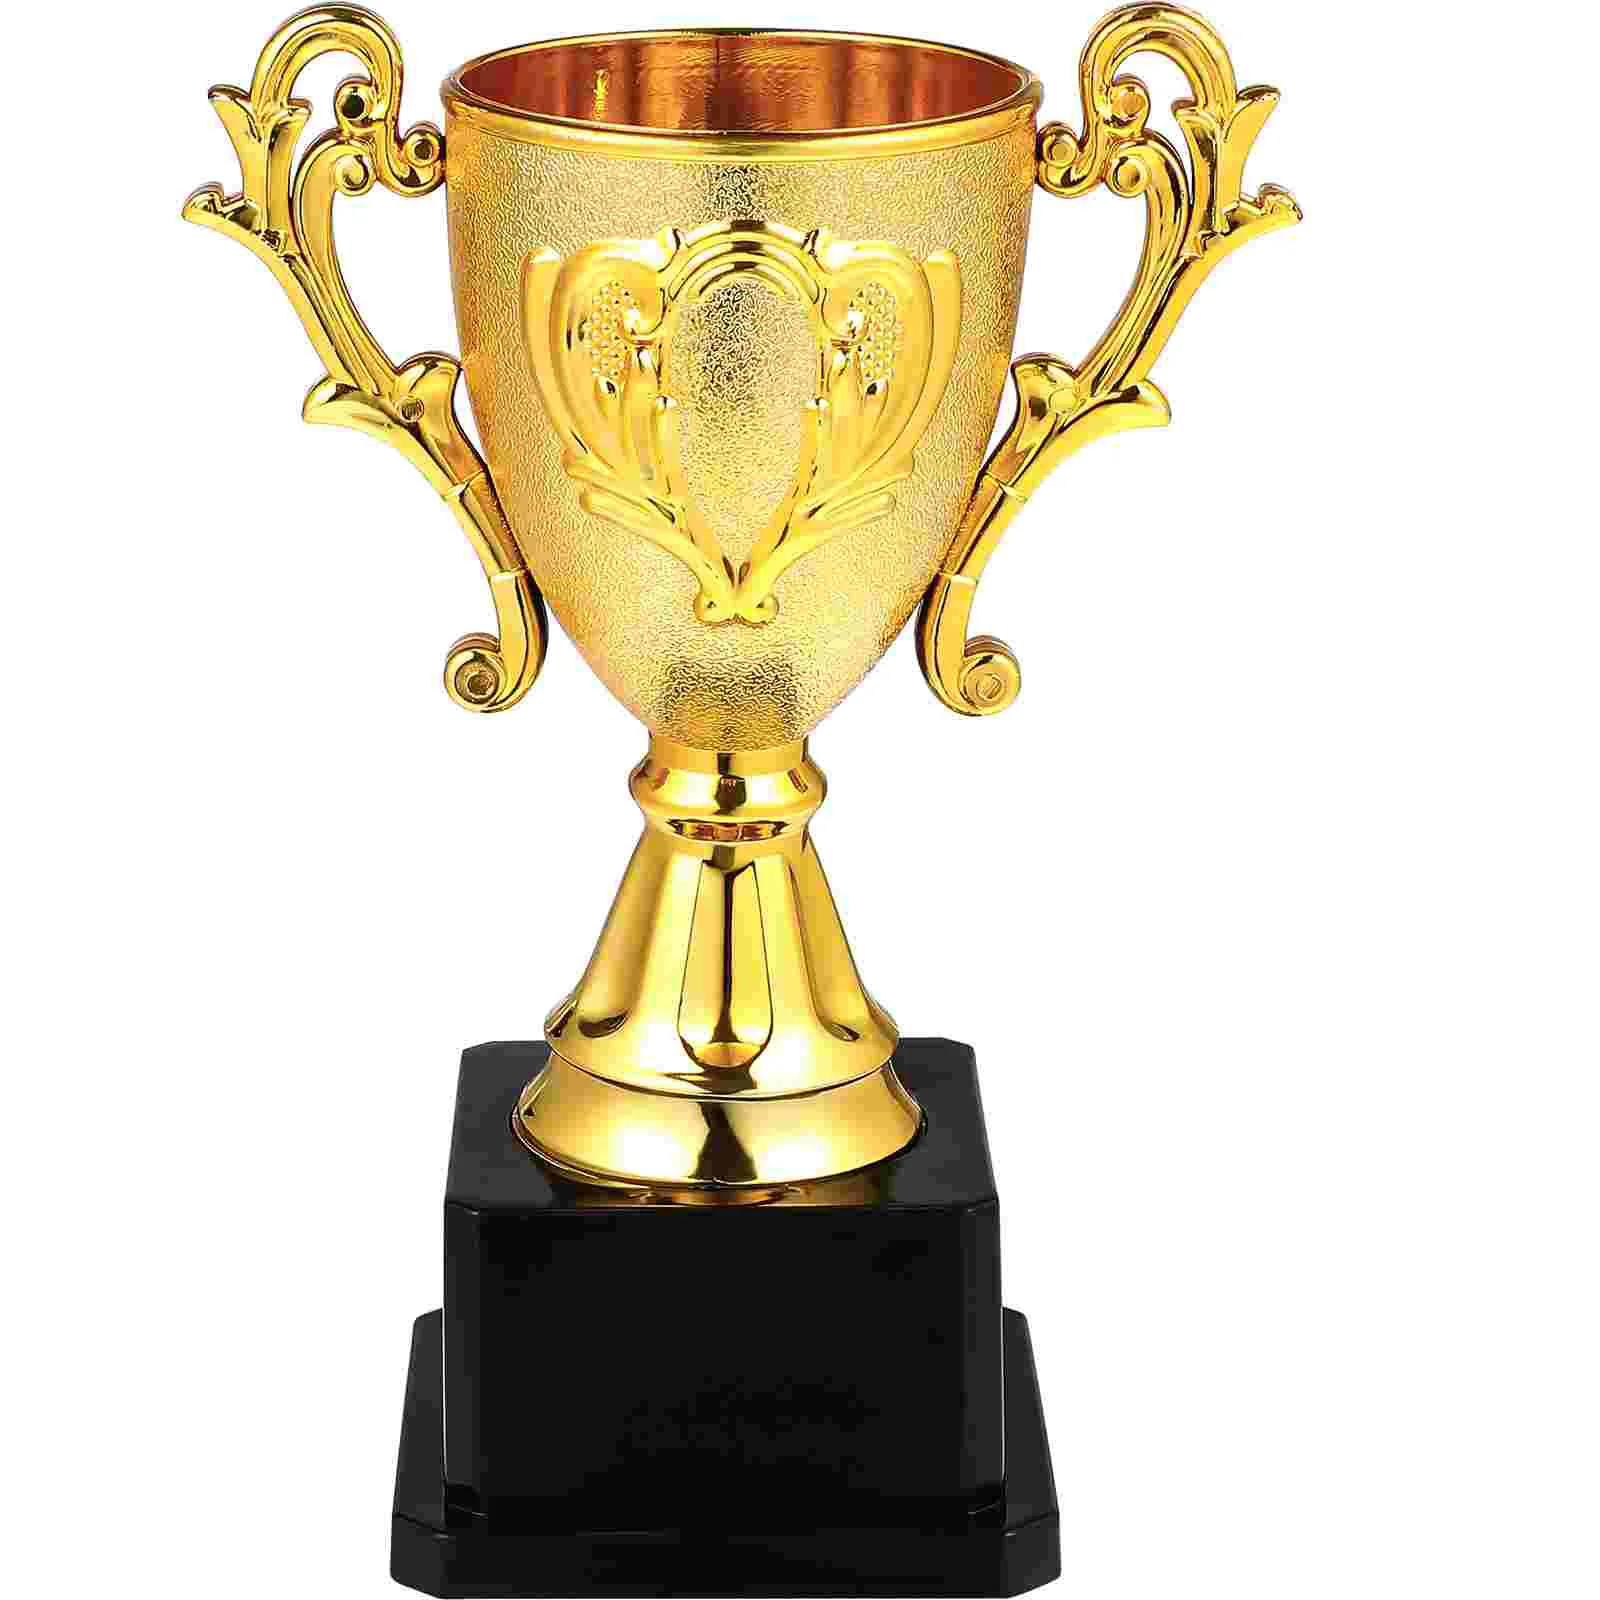 

Toy Kids Tournaments Trophy Personal Party Favors Trophies Games Competition Student Winner Award